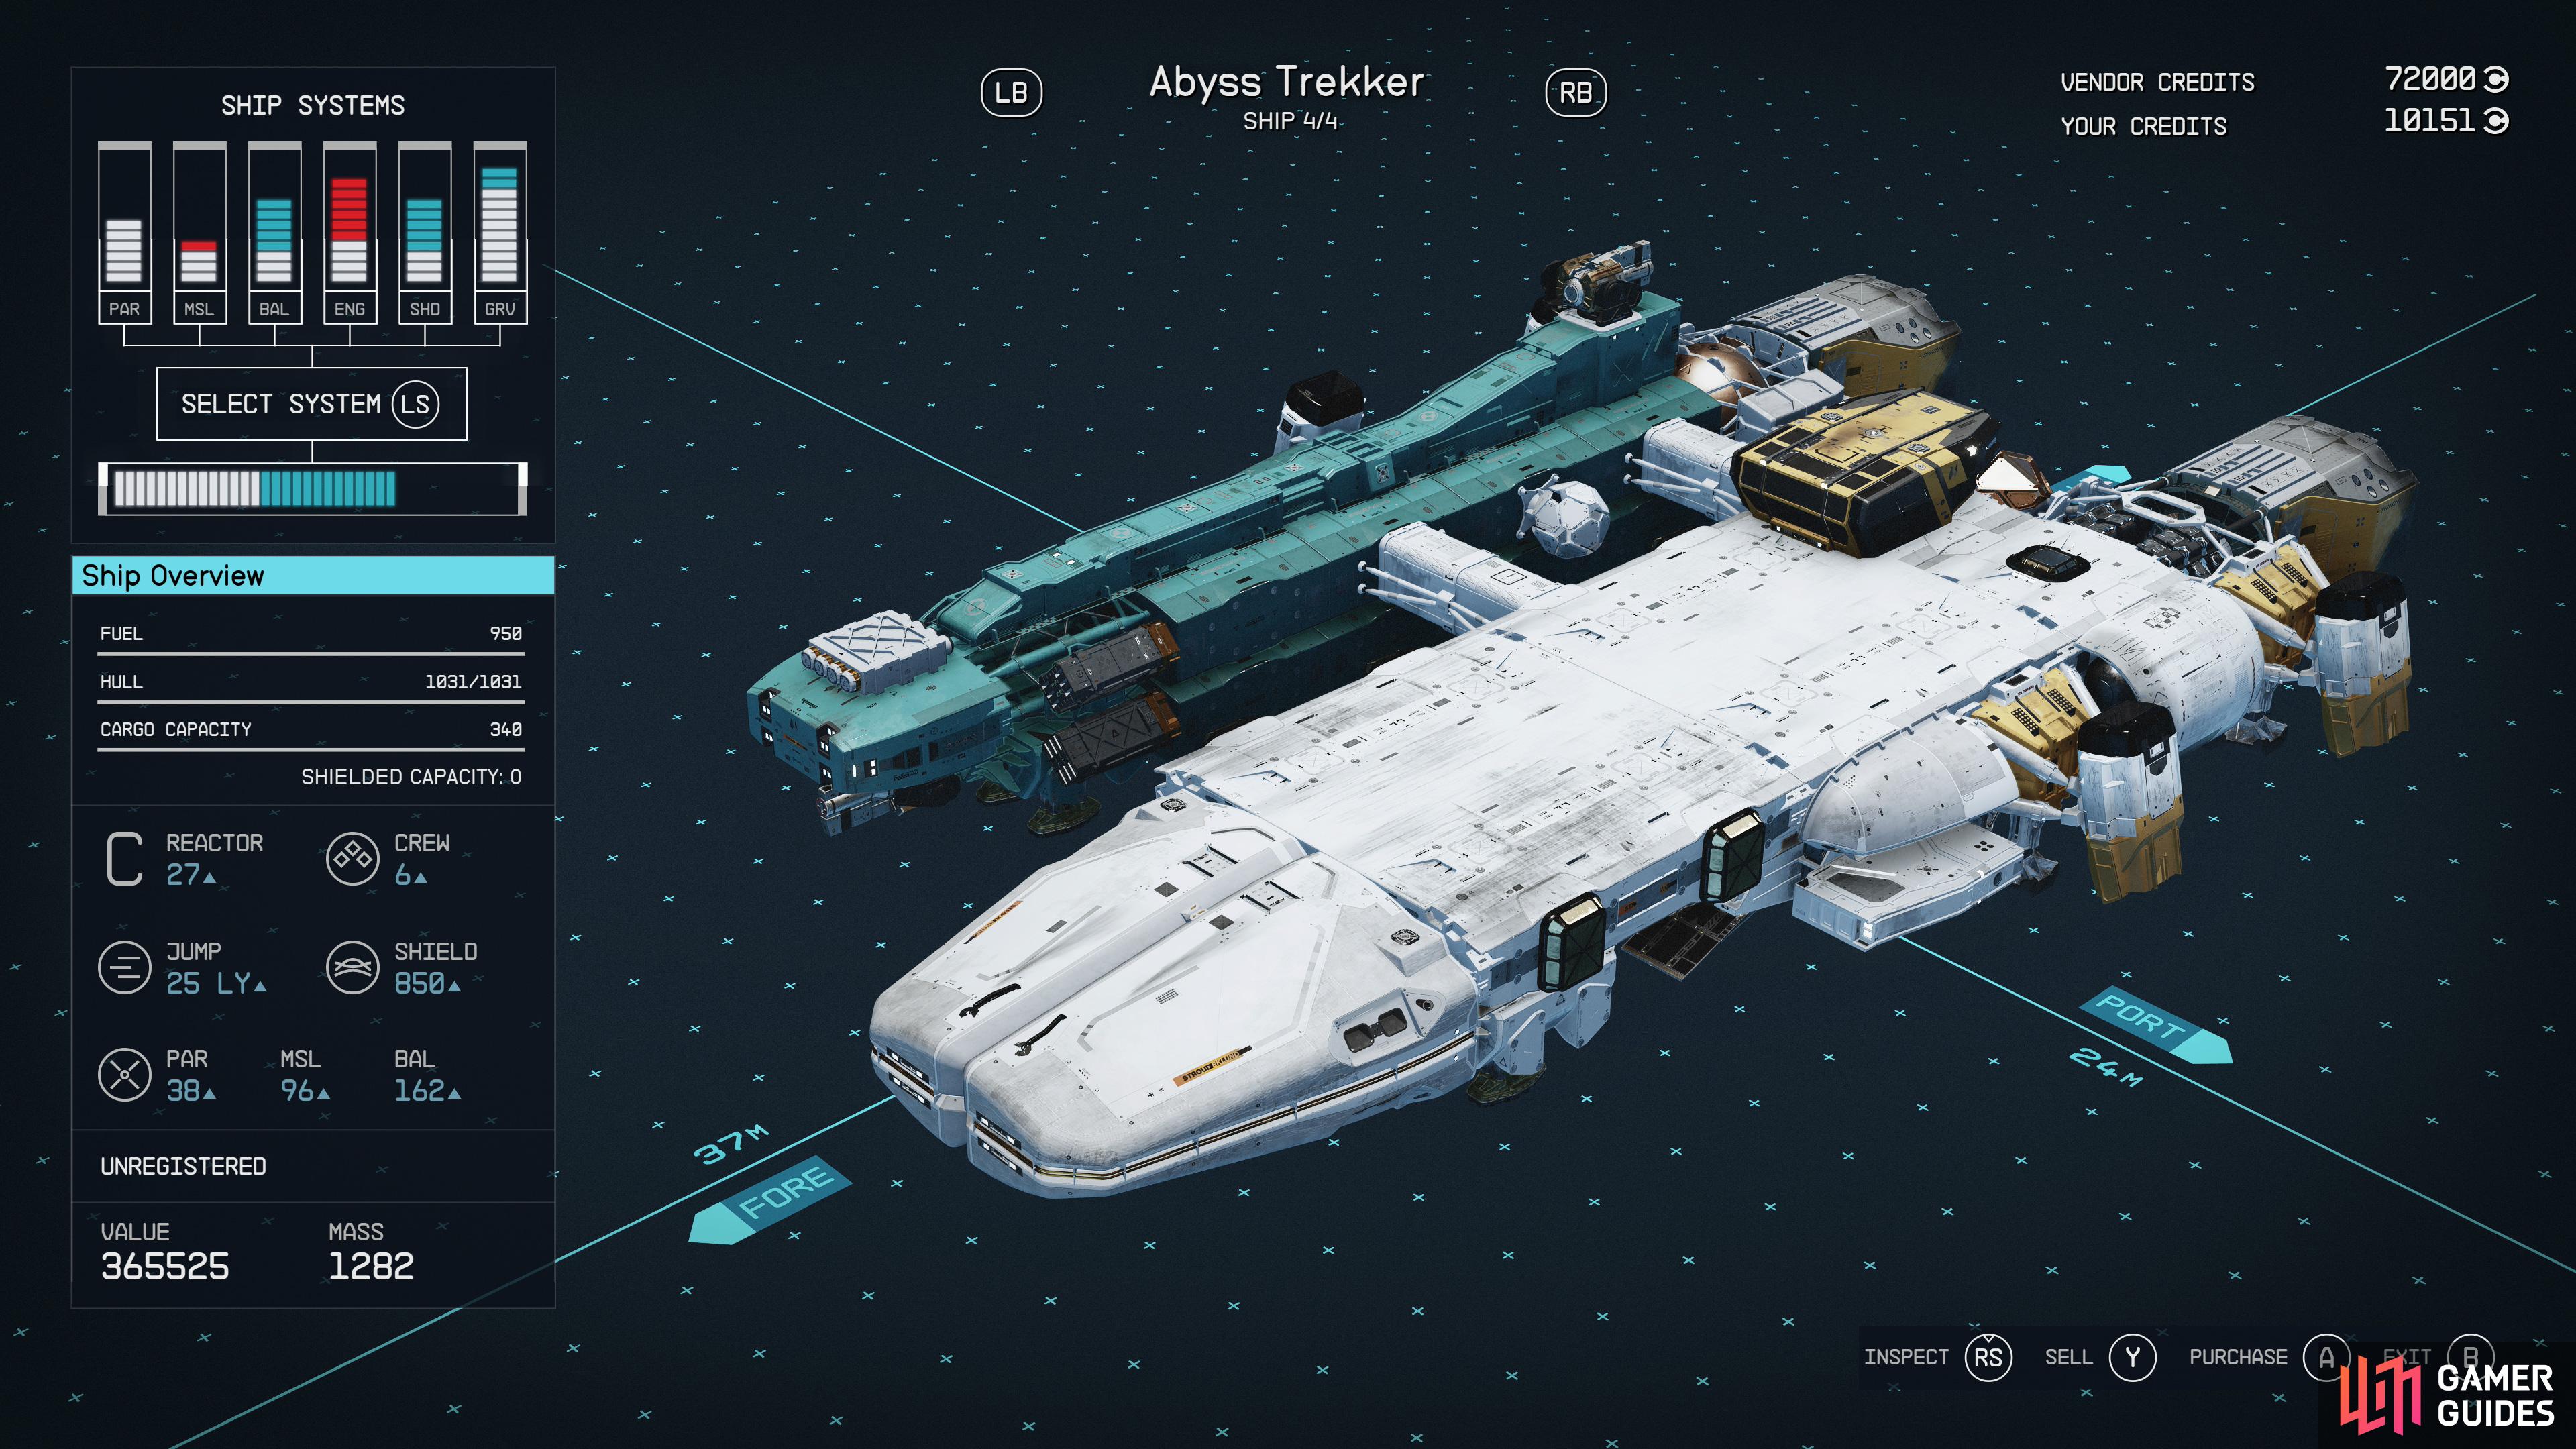 The Abyss Trekker can be purchased from the Ship Services Technician at Paradiso.